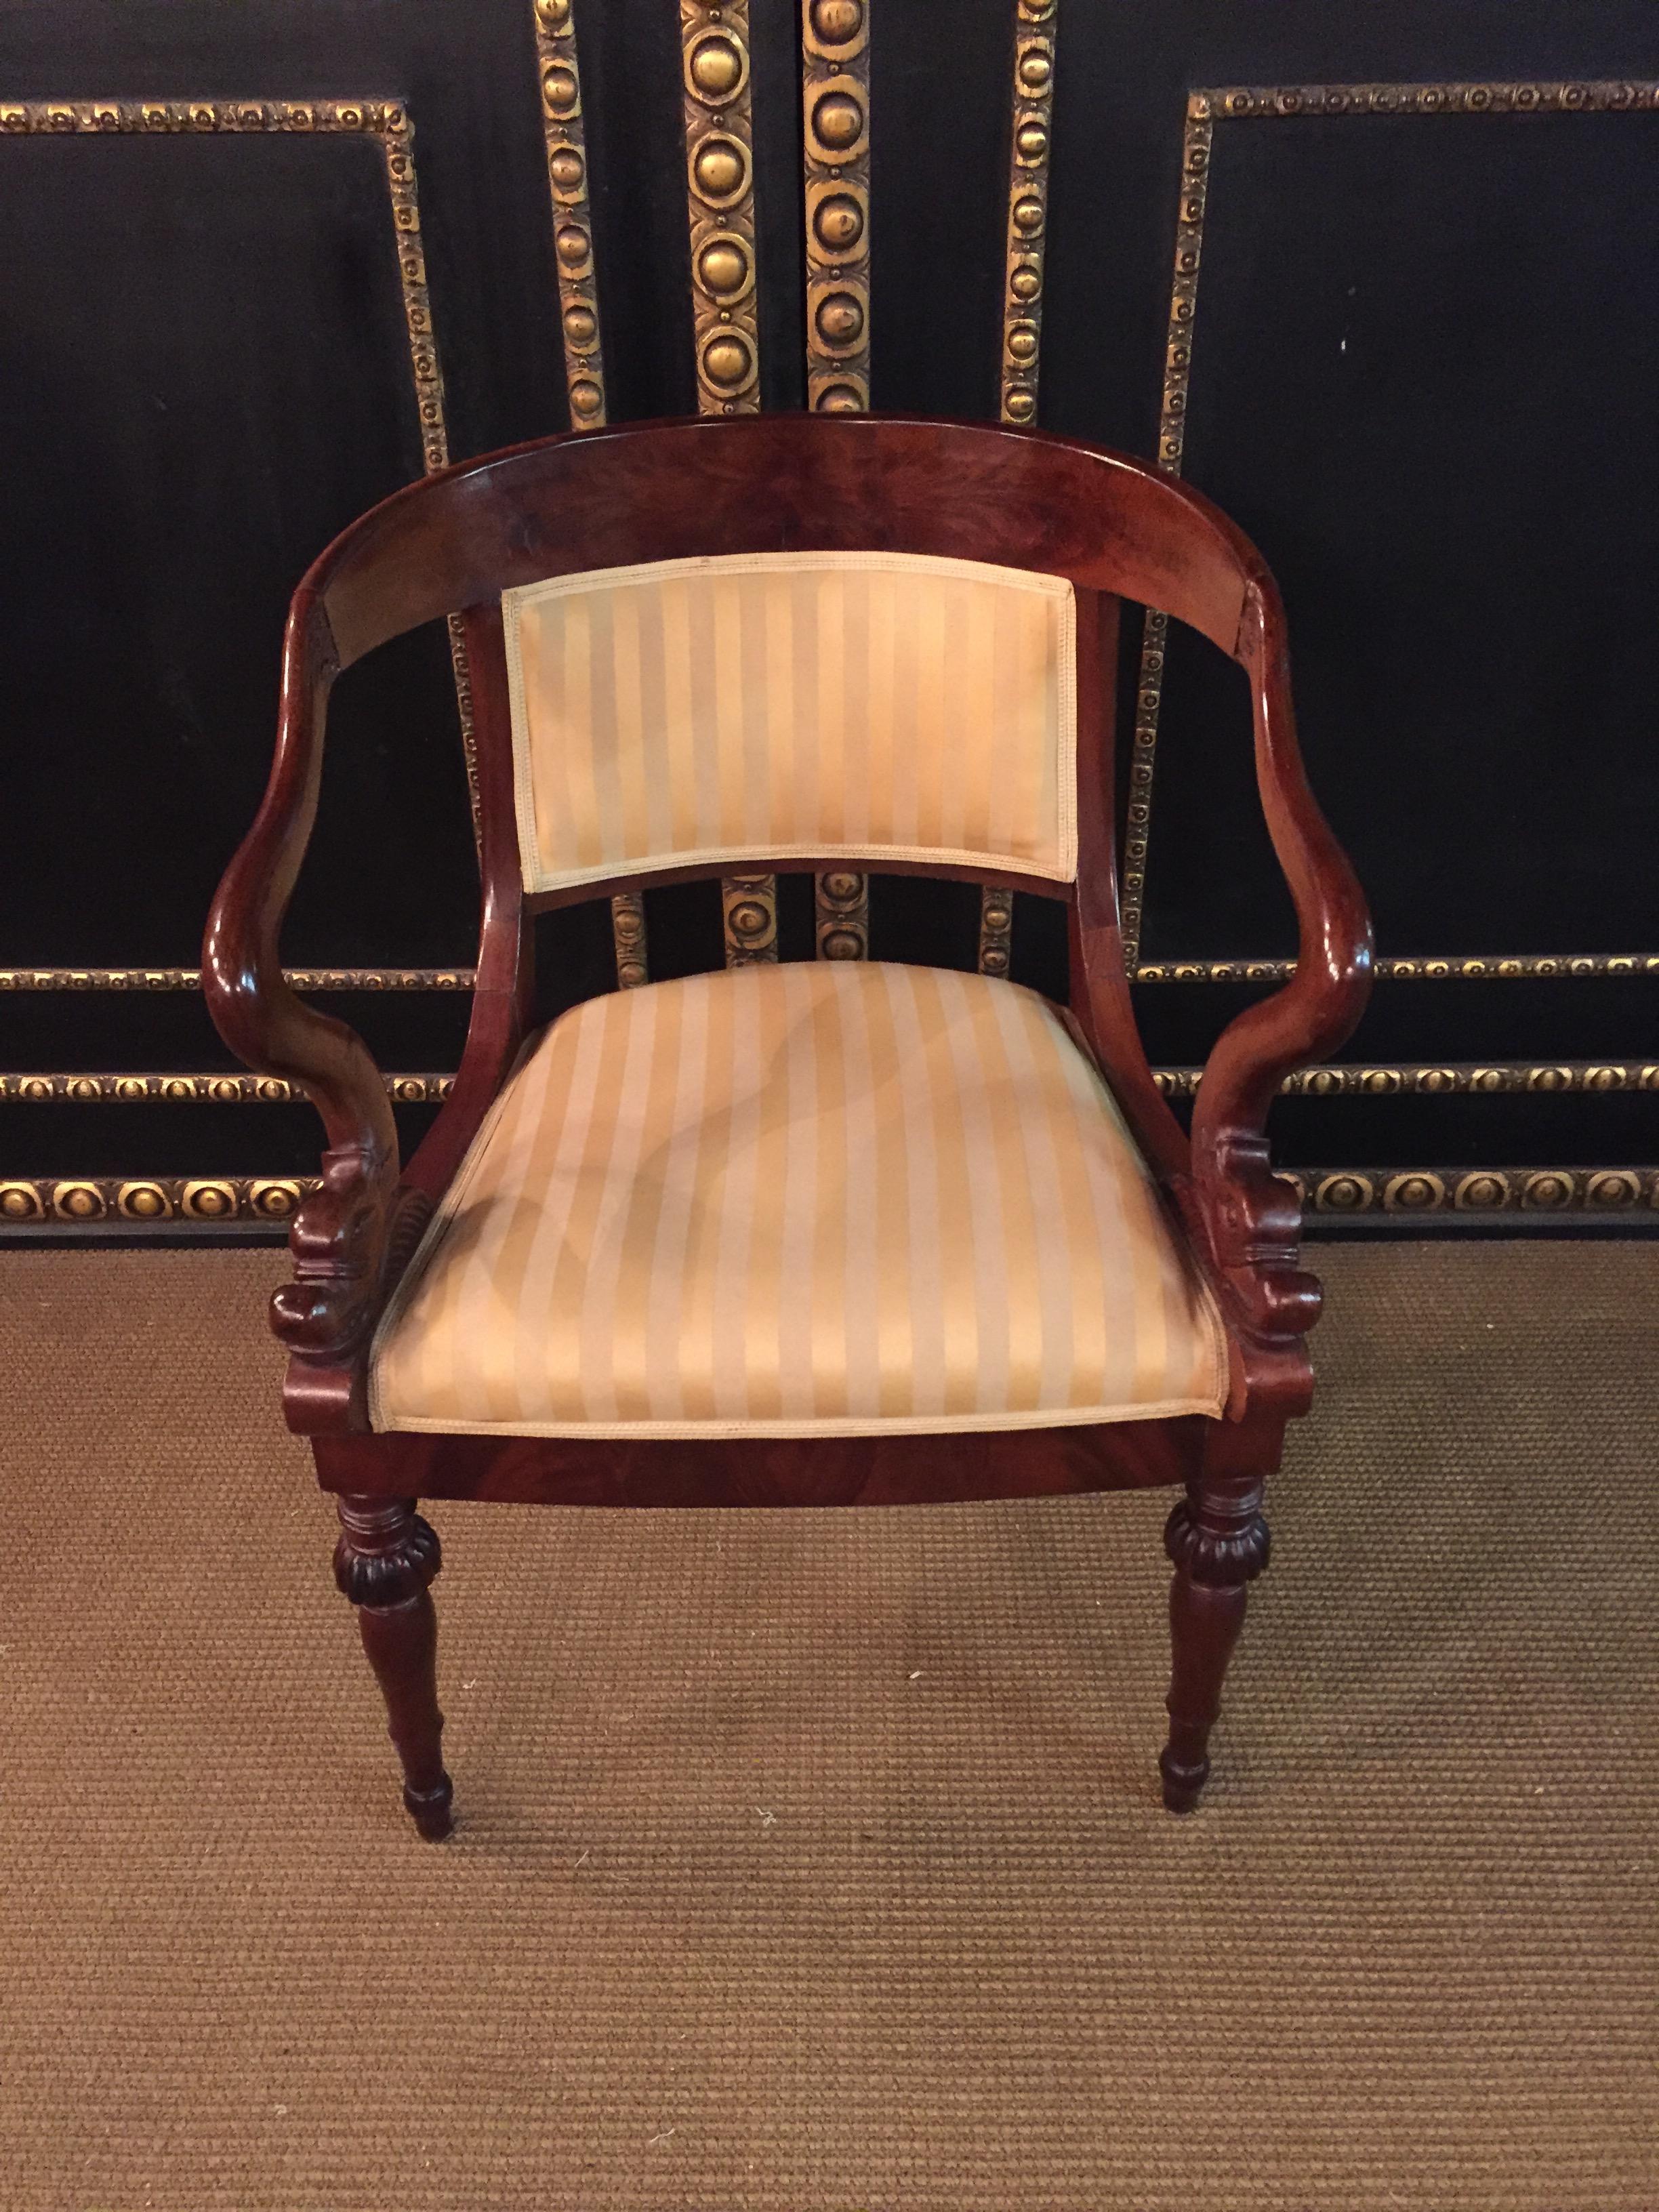 Hand-Carved French Empire Armchair, Solid Mahogany, 1800-1810, Shellac Polish